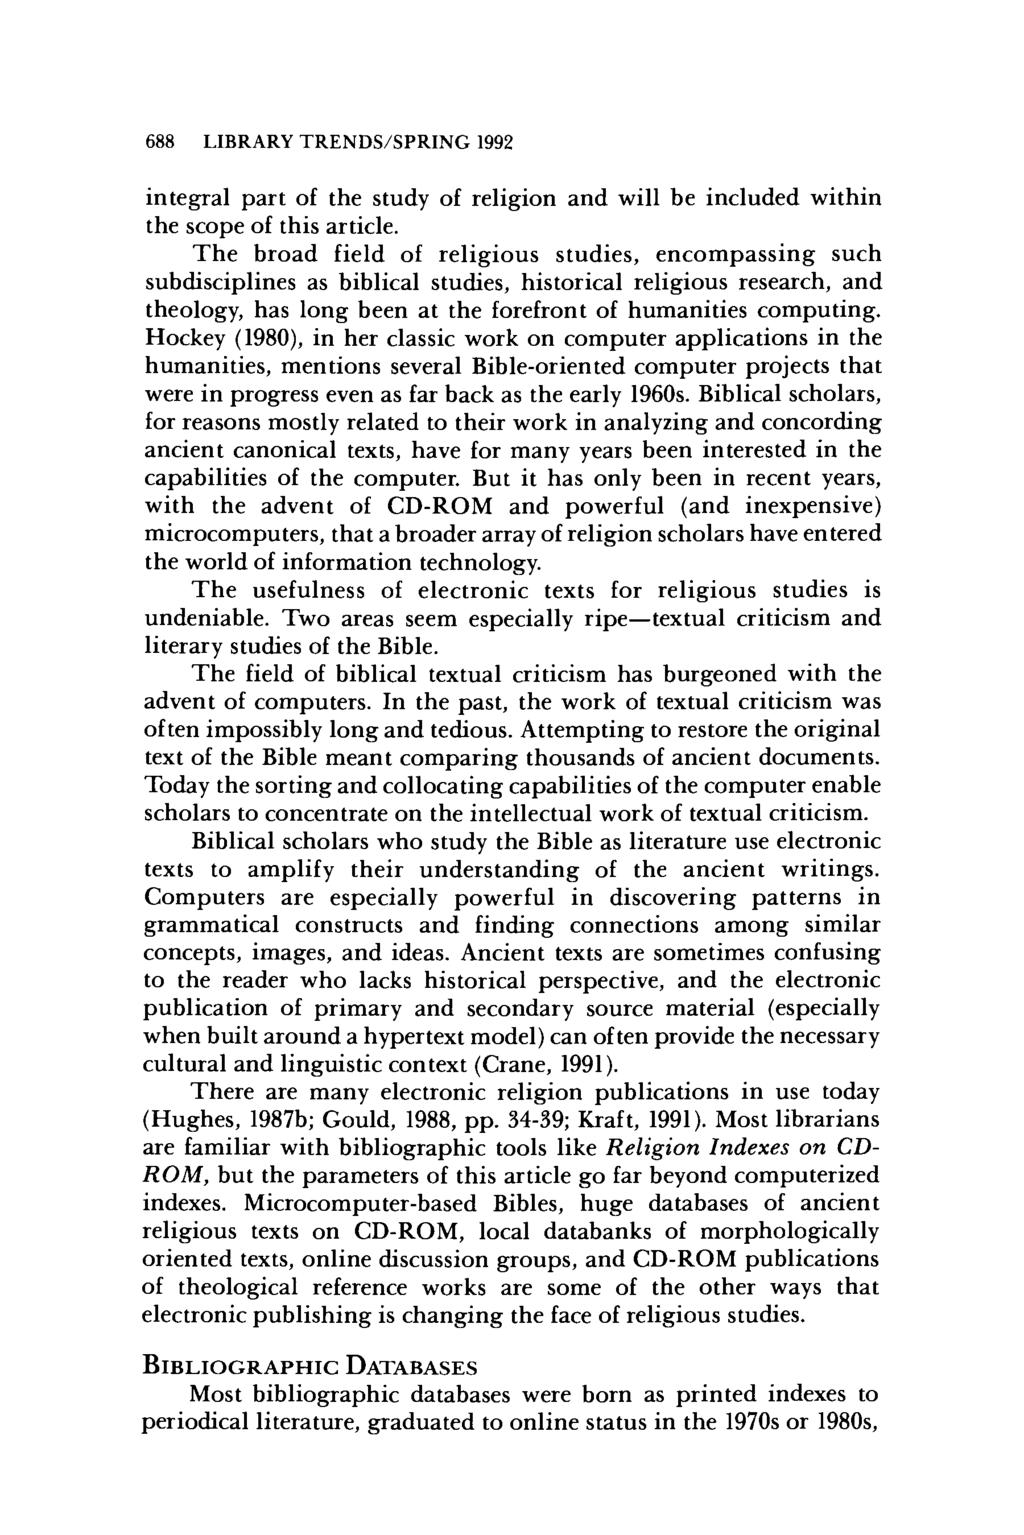 688 LIBRARY TRENDSISPRING 1992 integral part of the study of religion and will be included within the scope of this article.